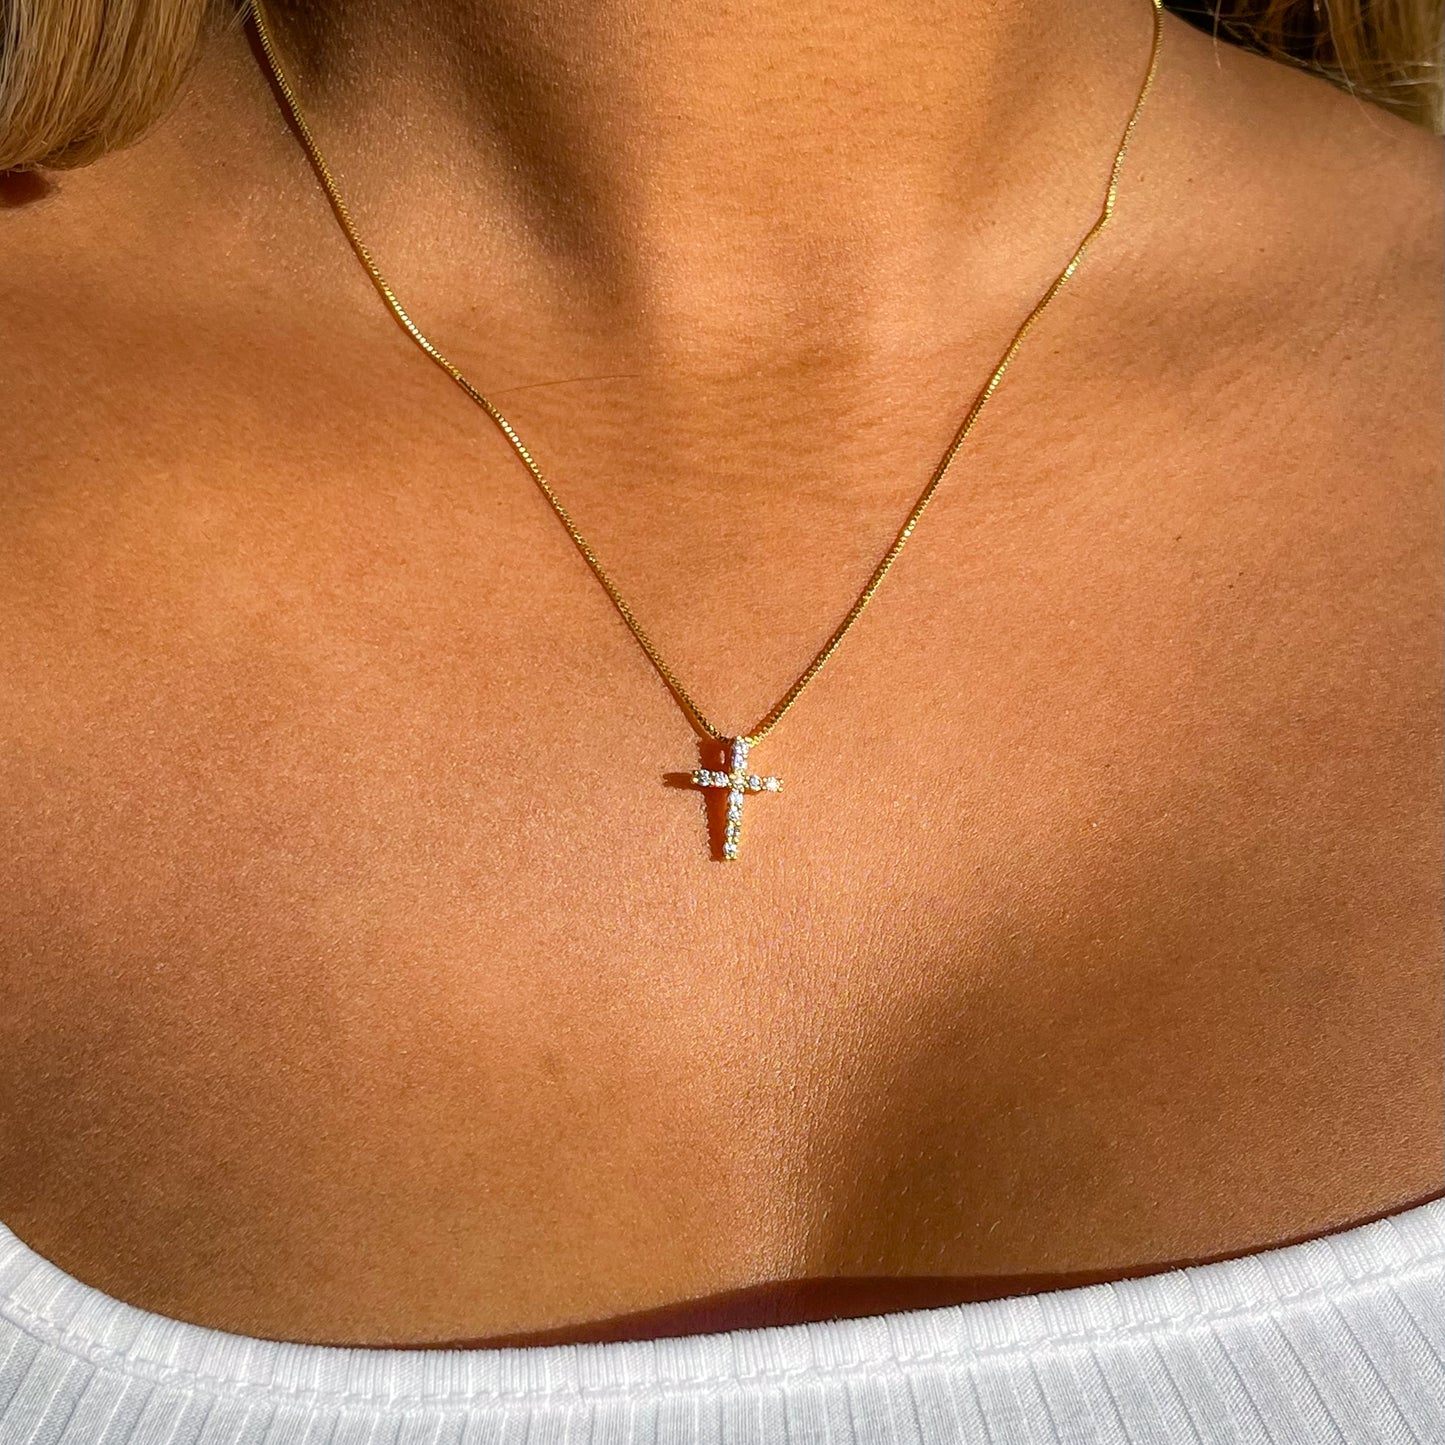 Dainty  Cross Necklace - Gold